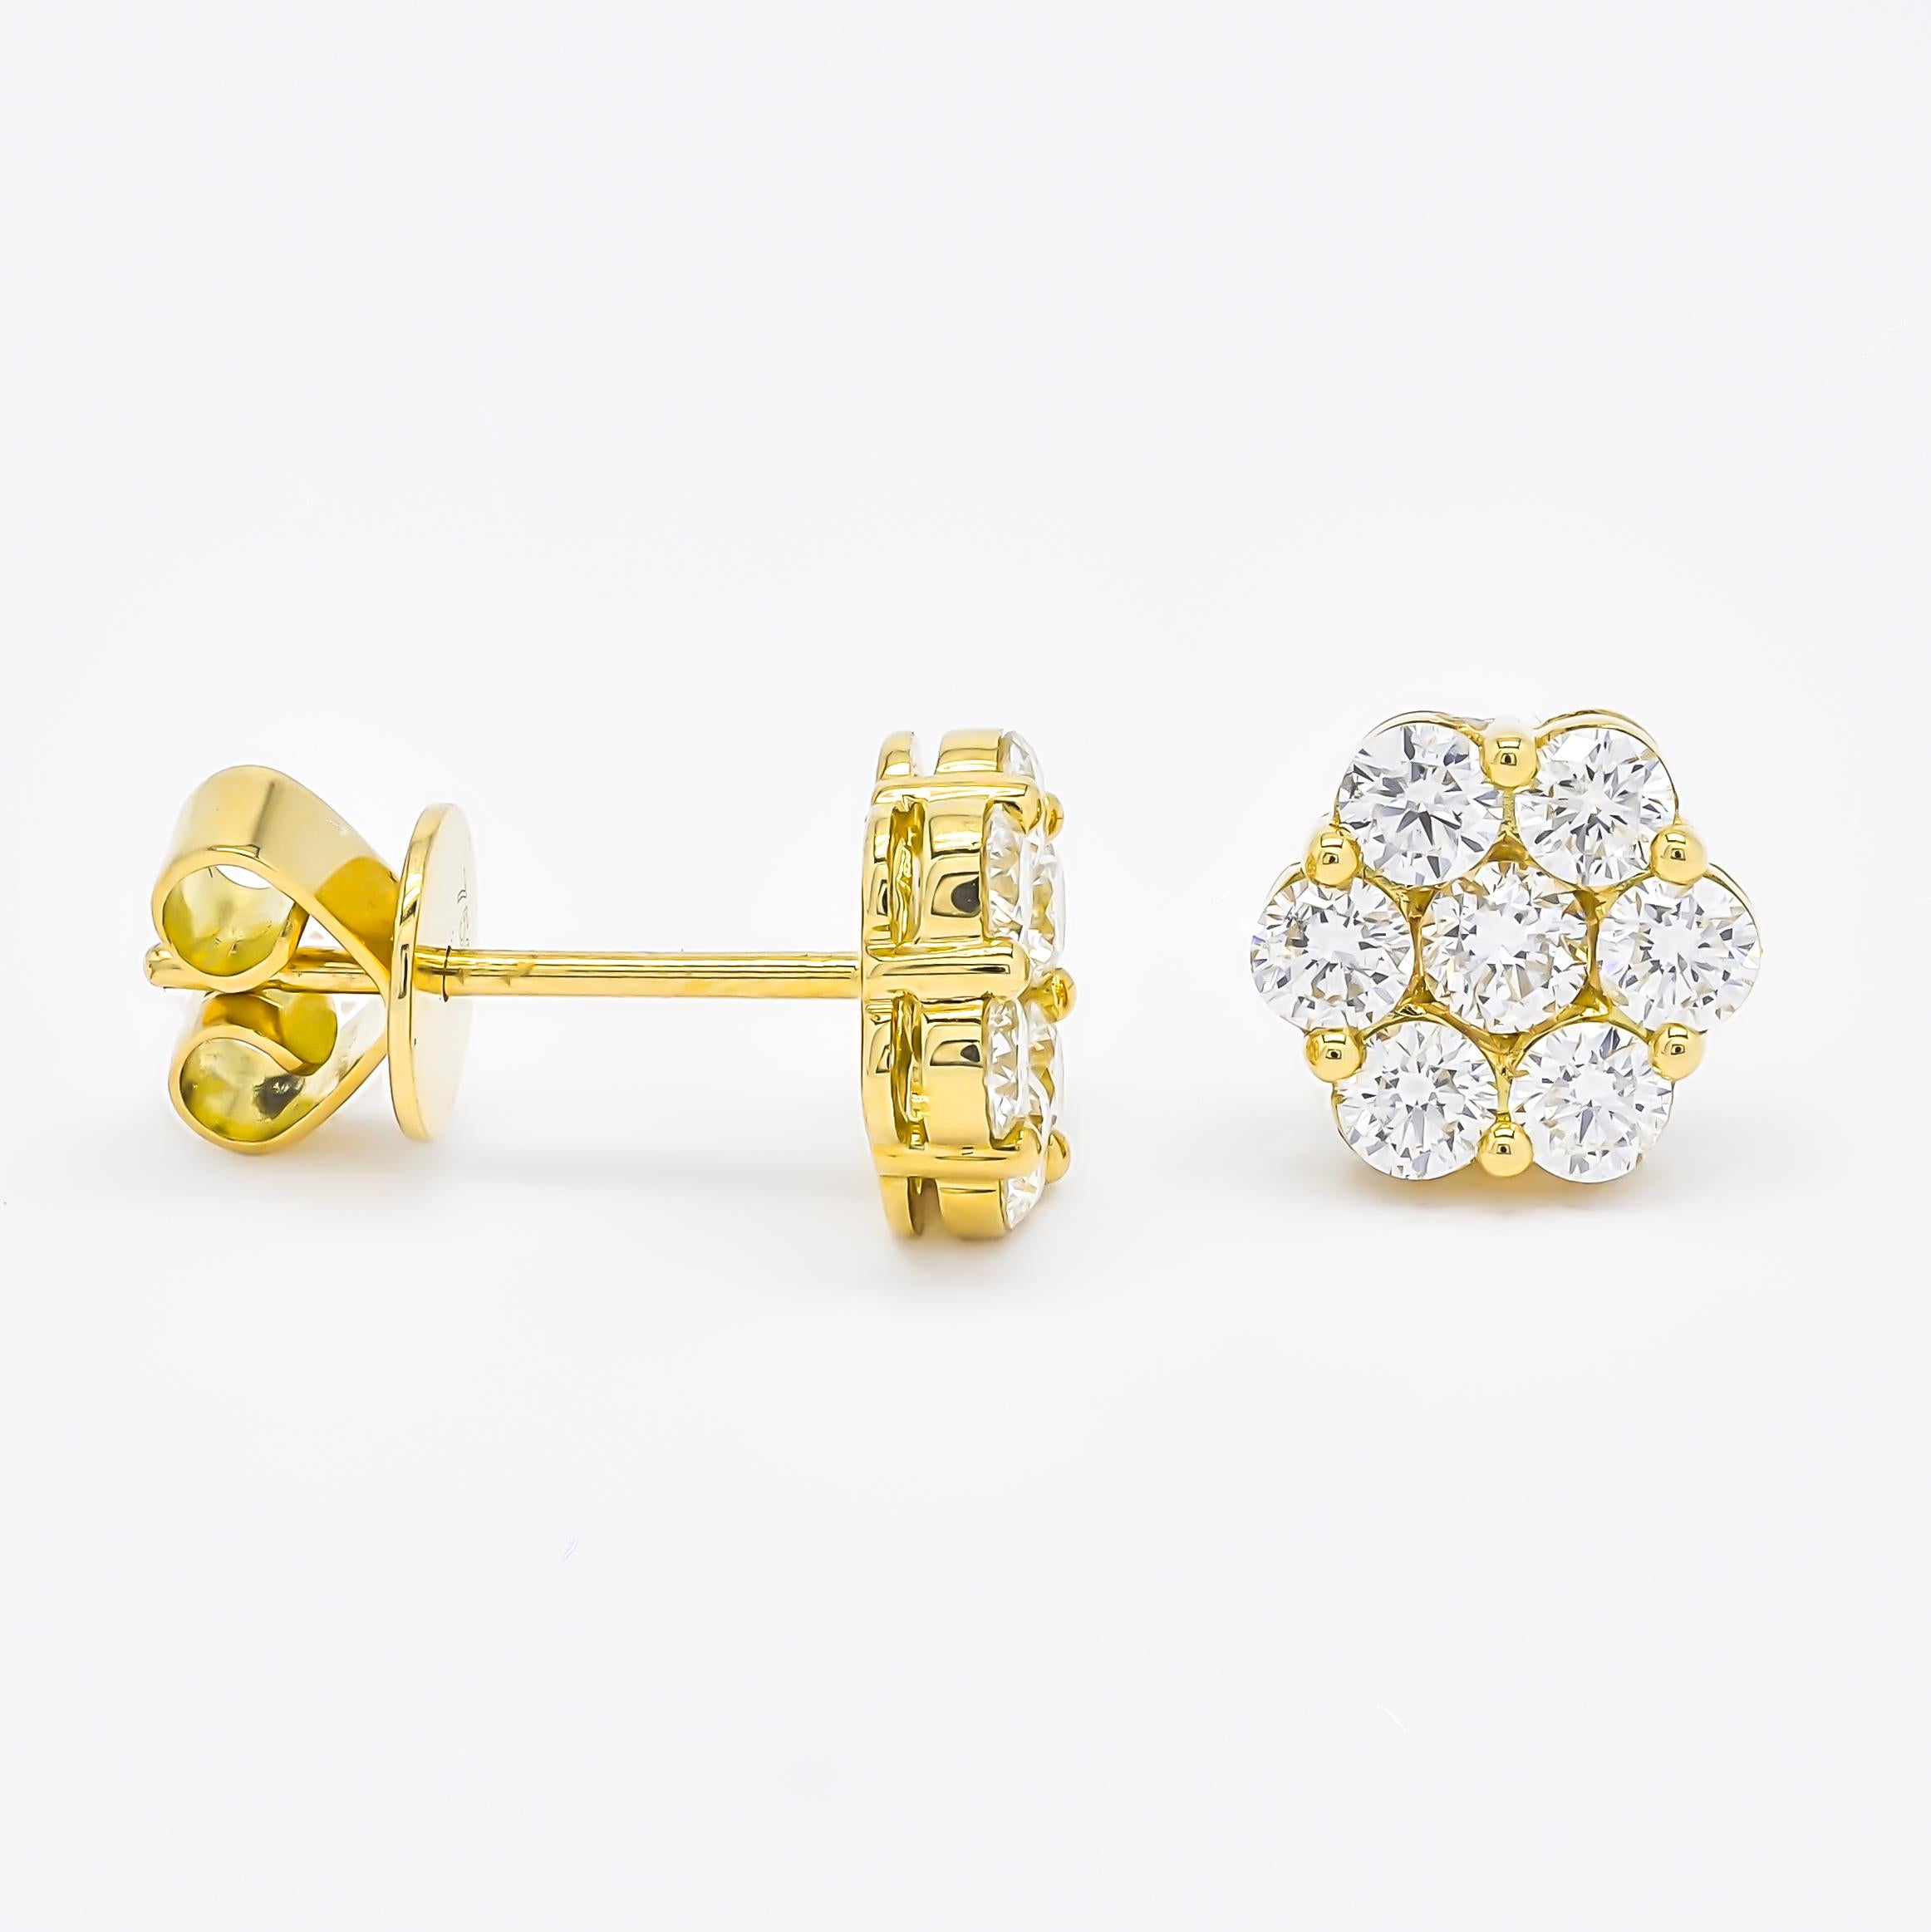 ntroducing a timeless classic with a sparkling twist - the solitaire cluster round diamond stud earring. This exquisite earring combines the elegance of a solitaire diamond with the brilliance of a surrounding cluster, creating a stunning and